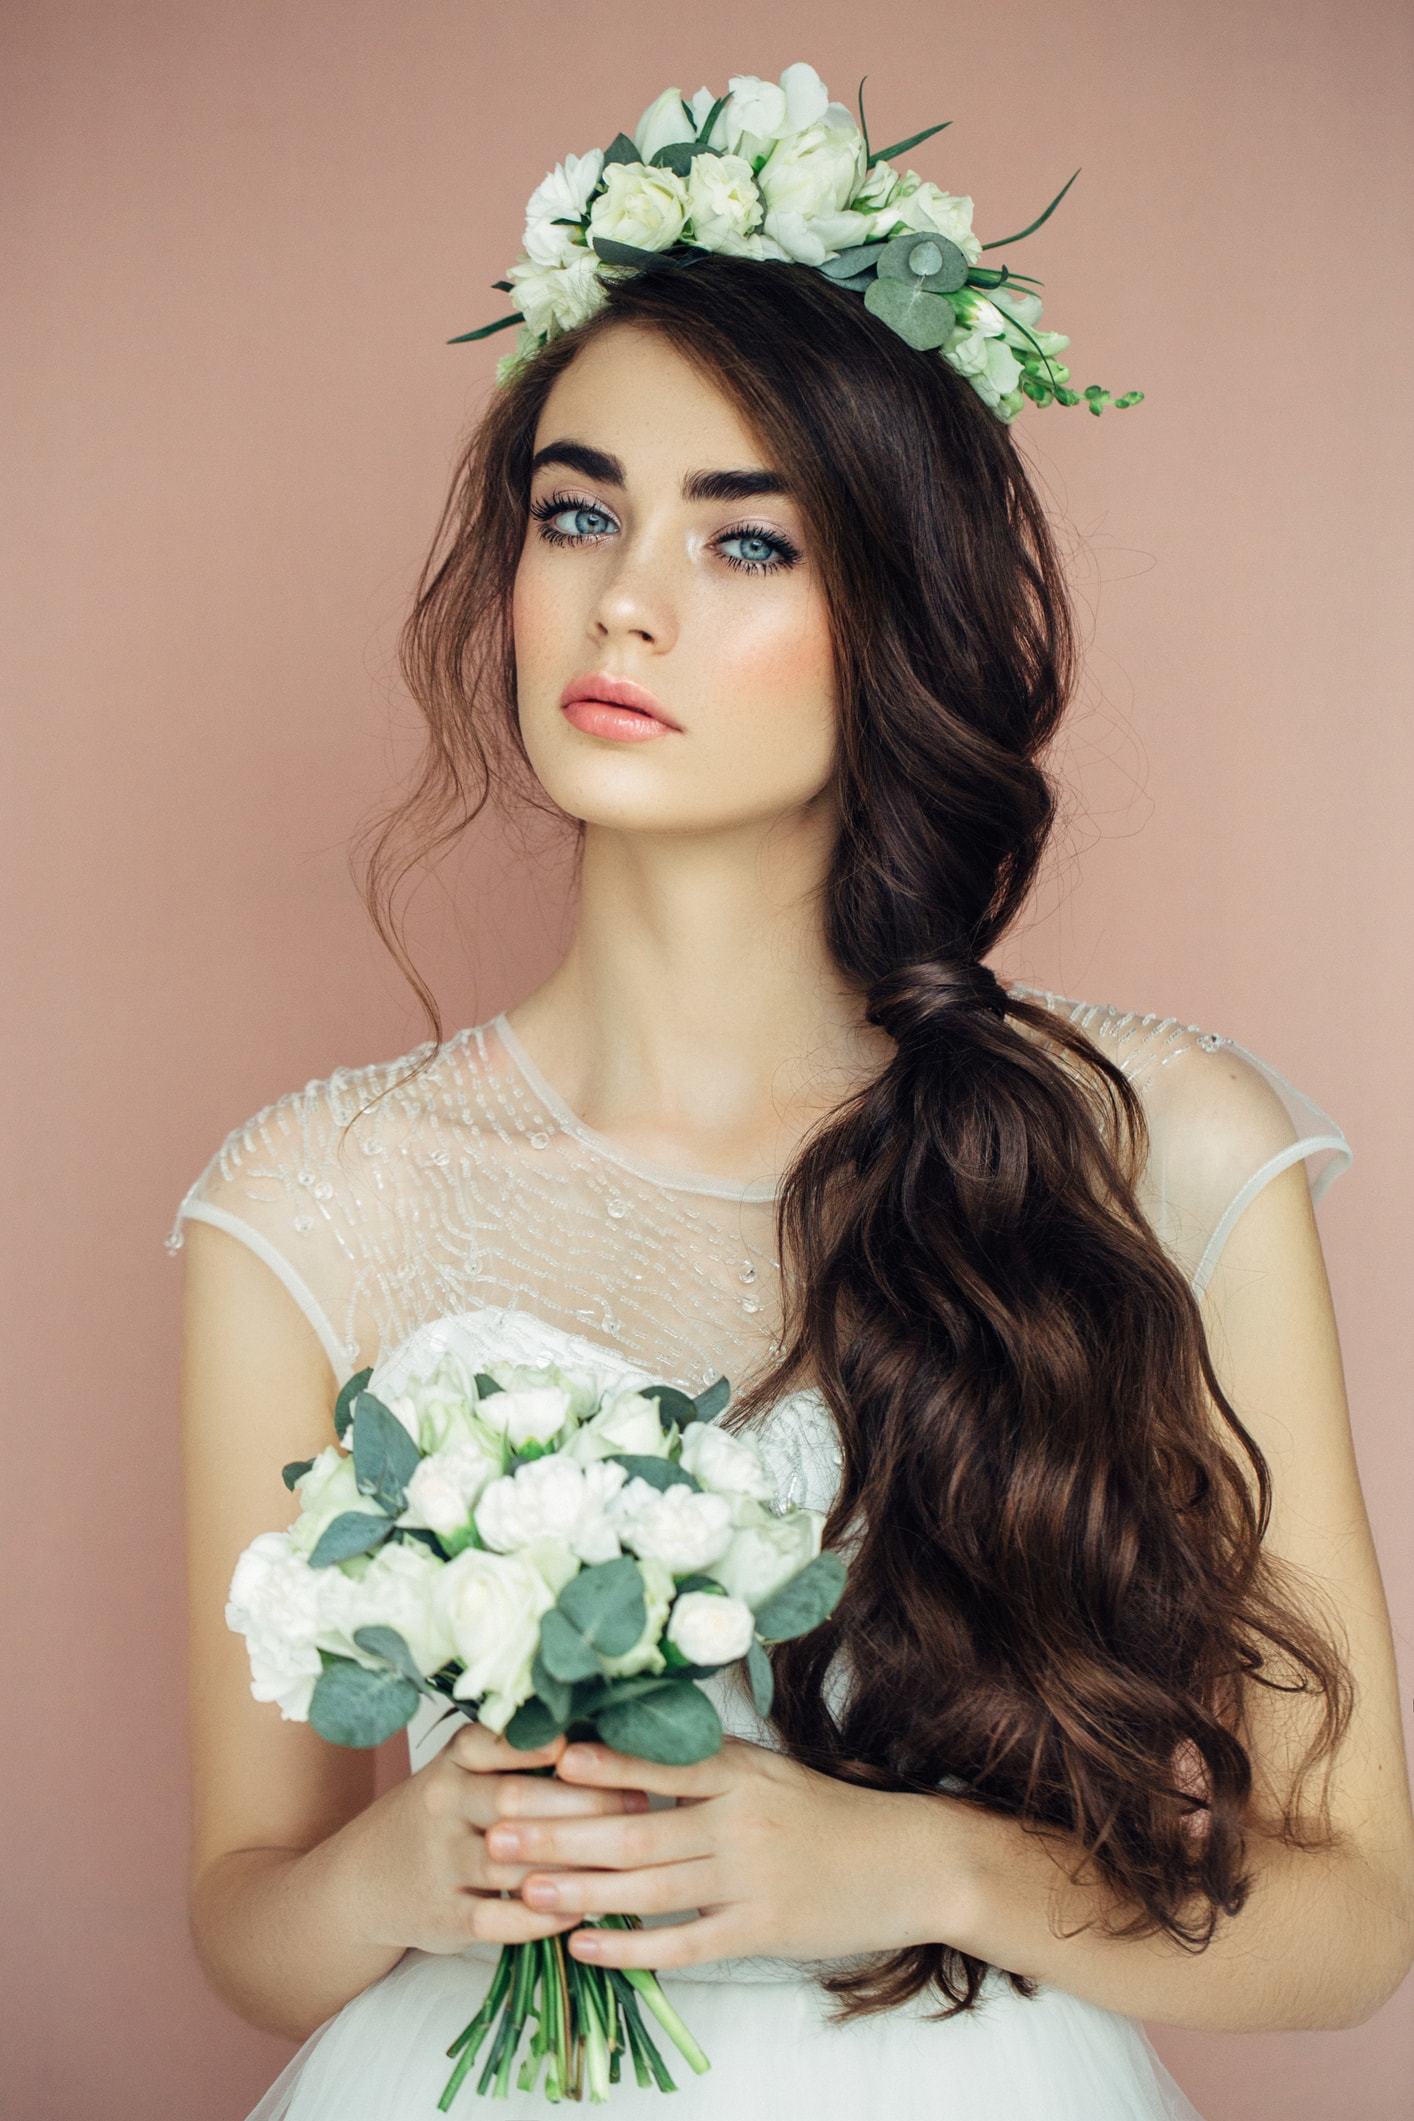 20 Soft and Sweet Wedding Hairstyles for Curly Hair 2023